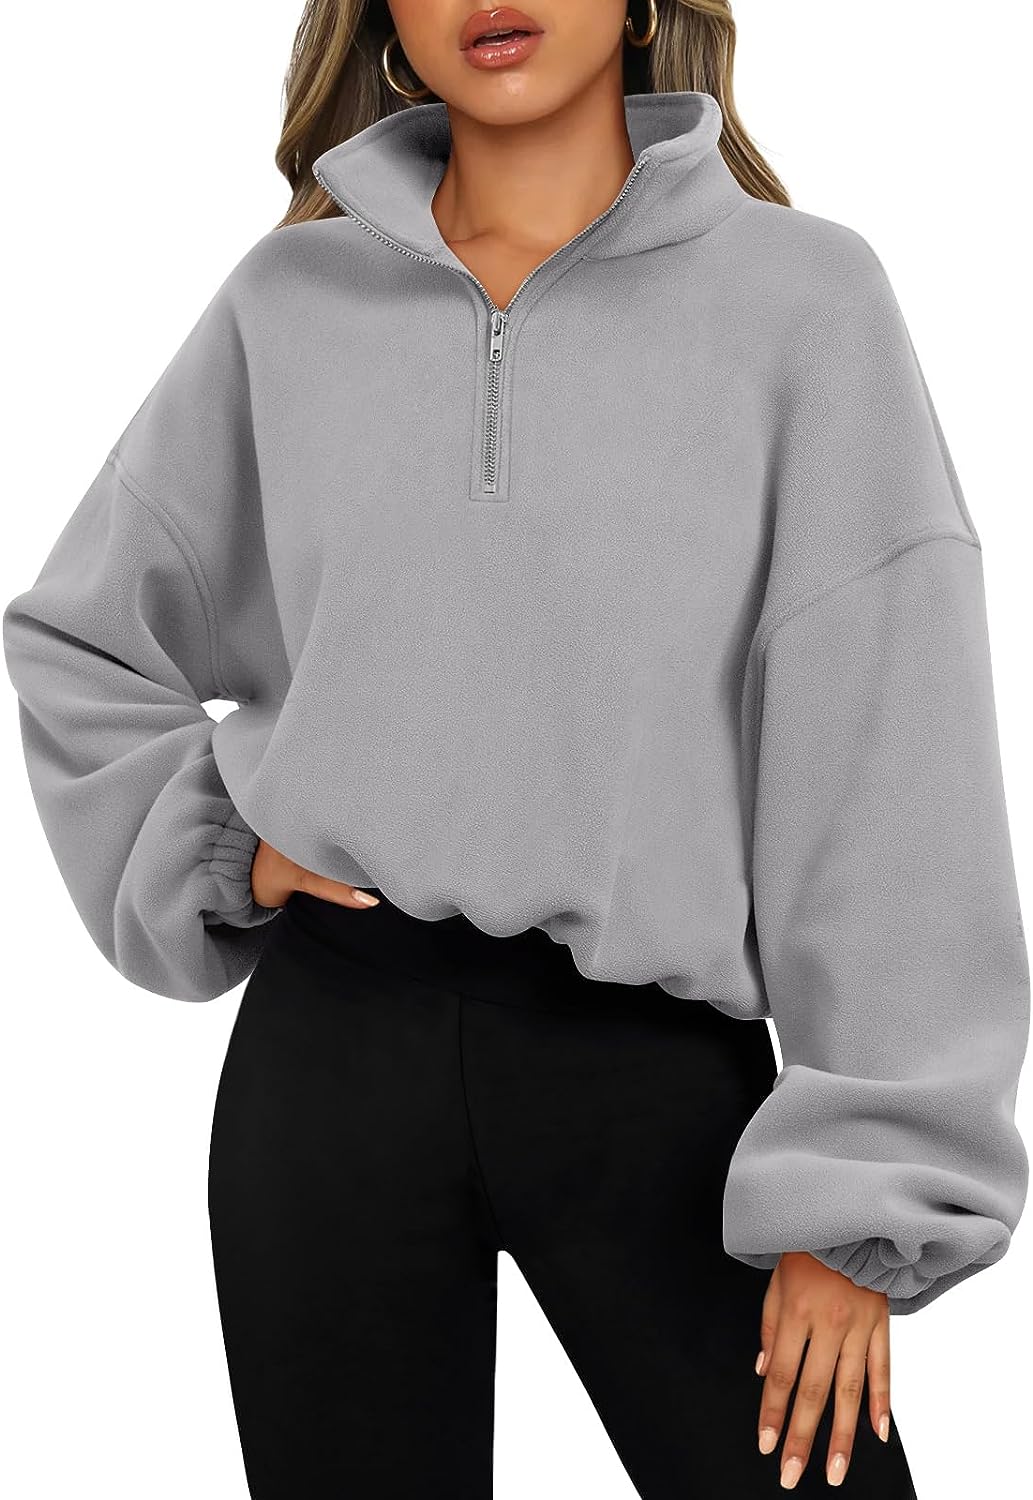 AUTOMET Womens Sweatshirts Half Zip Cropped Pullover Fleece Quarter Zipper  Hoodies Fall outfits Clothes Thumb Hole